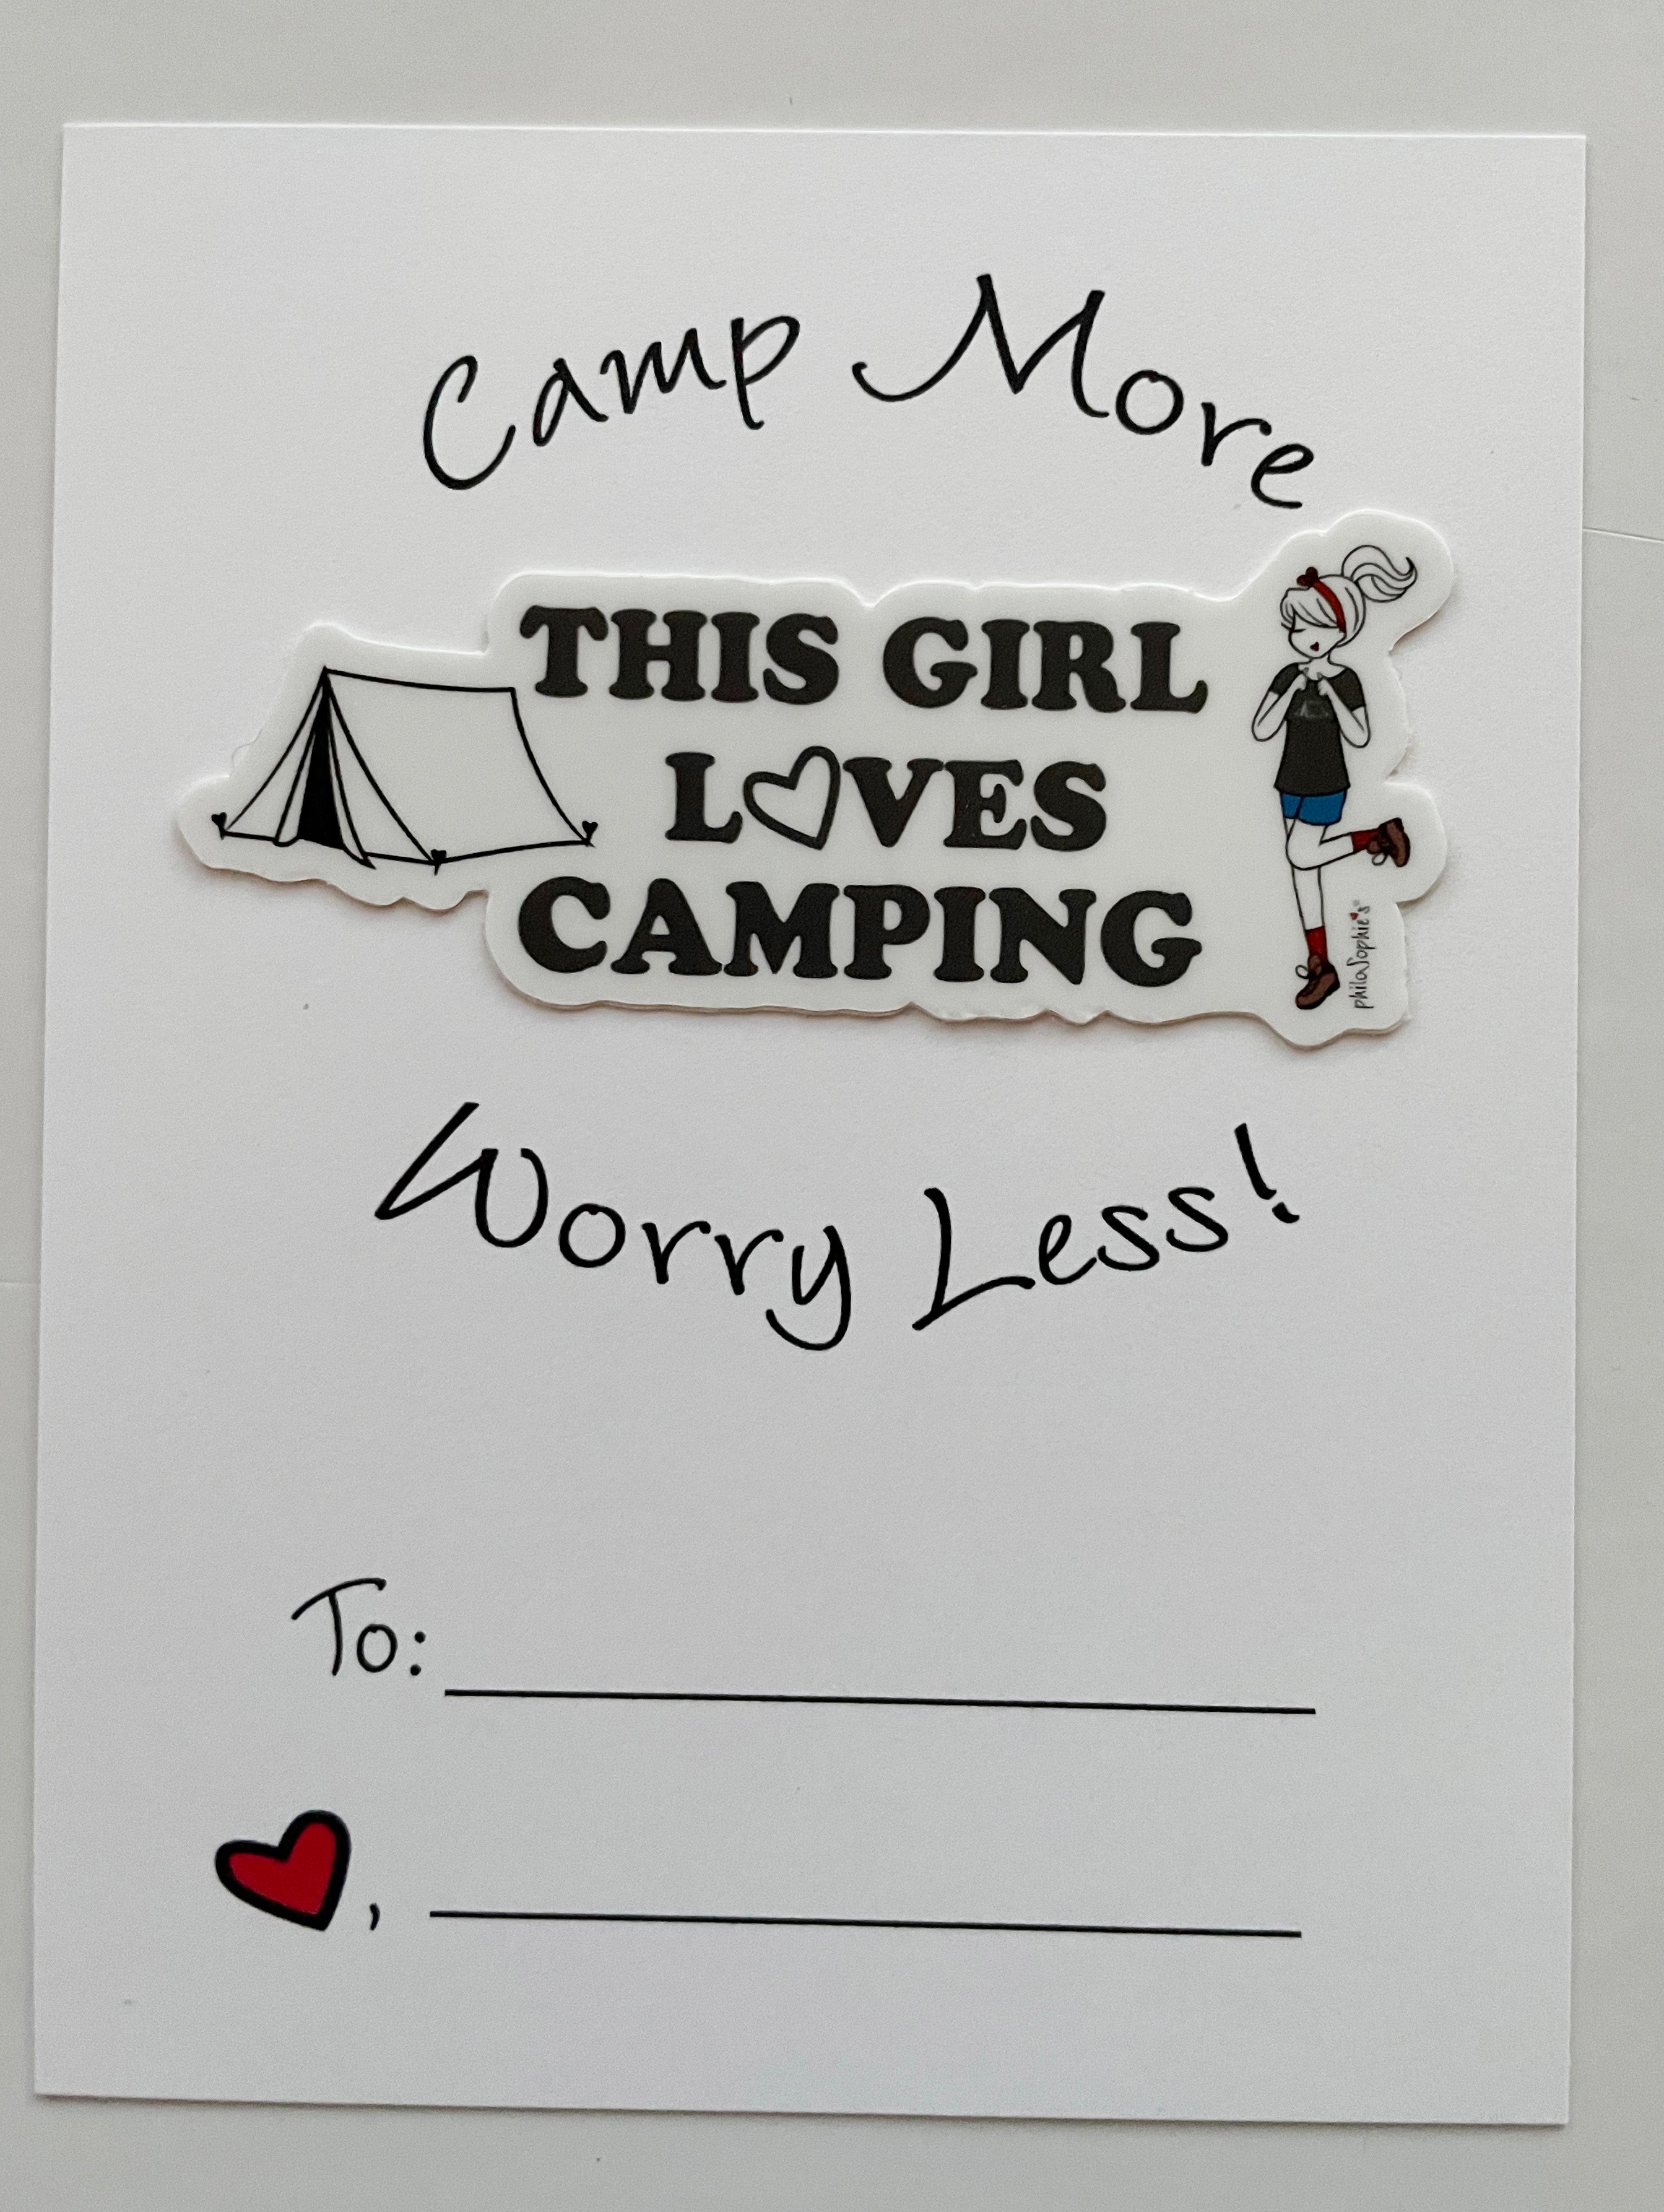 This Girl Loves Camping Vinyl Sticker Greeting Card